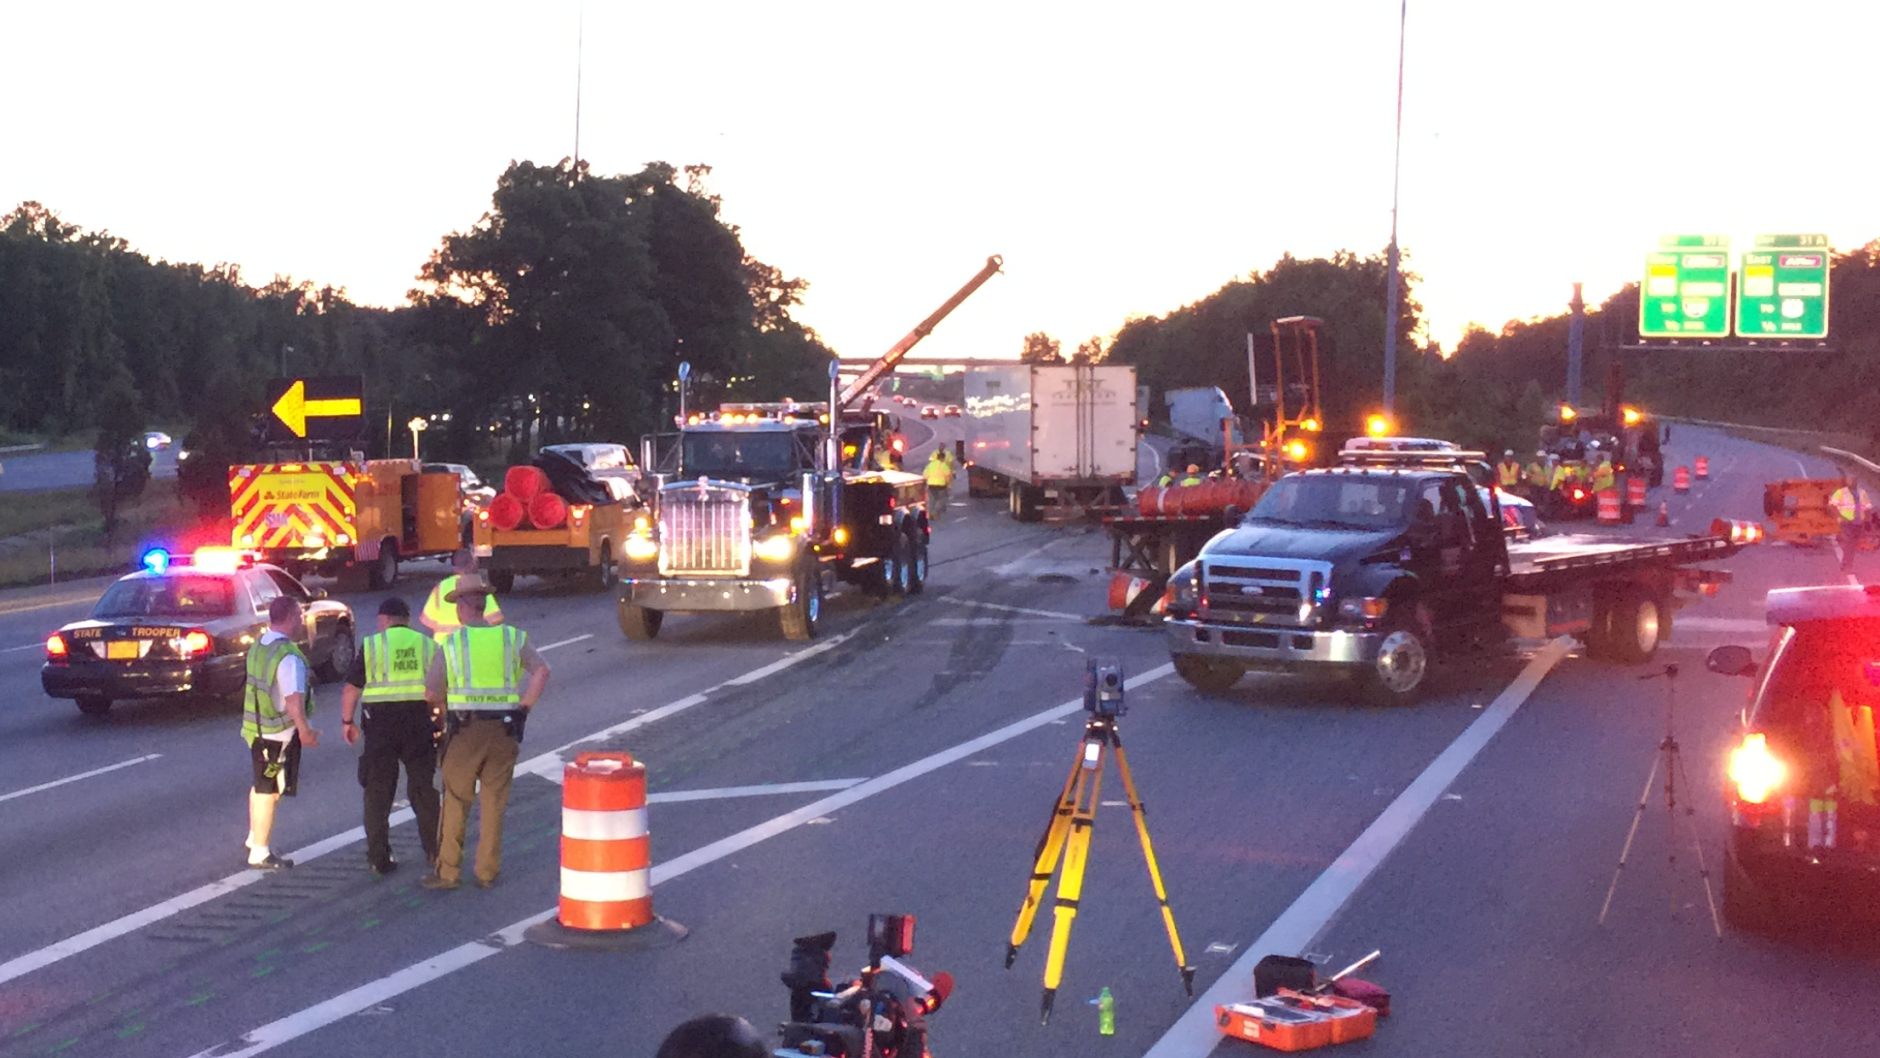 One man has died, another is injured and traffic is snarled after a crash involving a tractor-trailer and two construction vehicles on Interstate 95 at Md. 200. (WTOP/Kristi King)